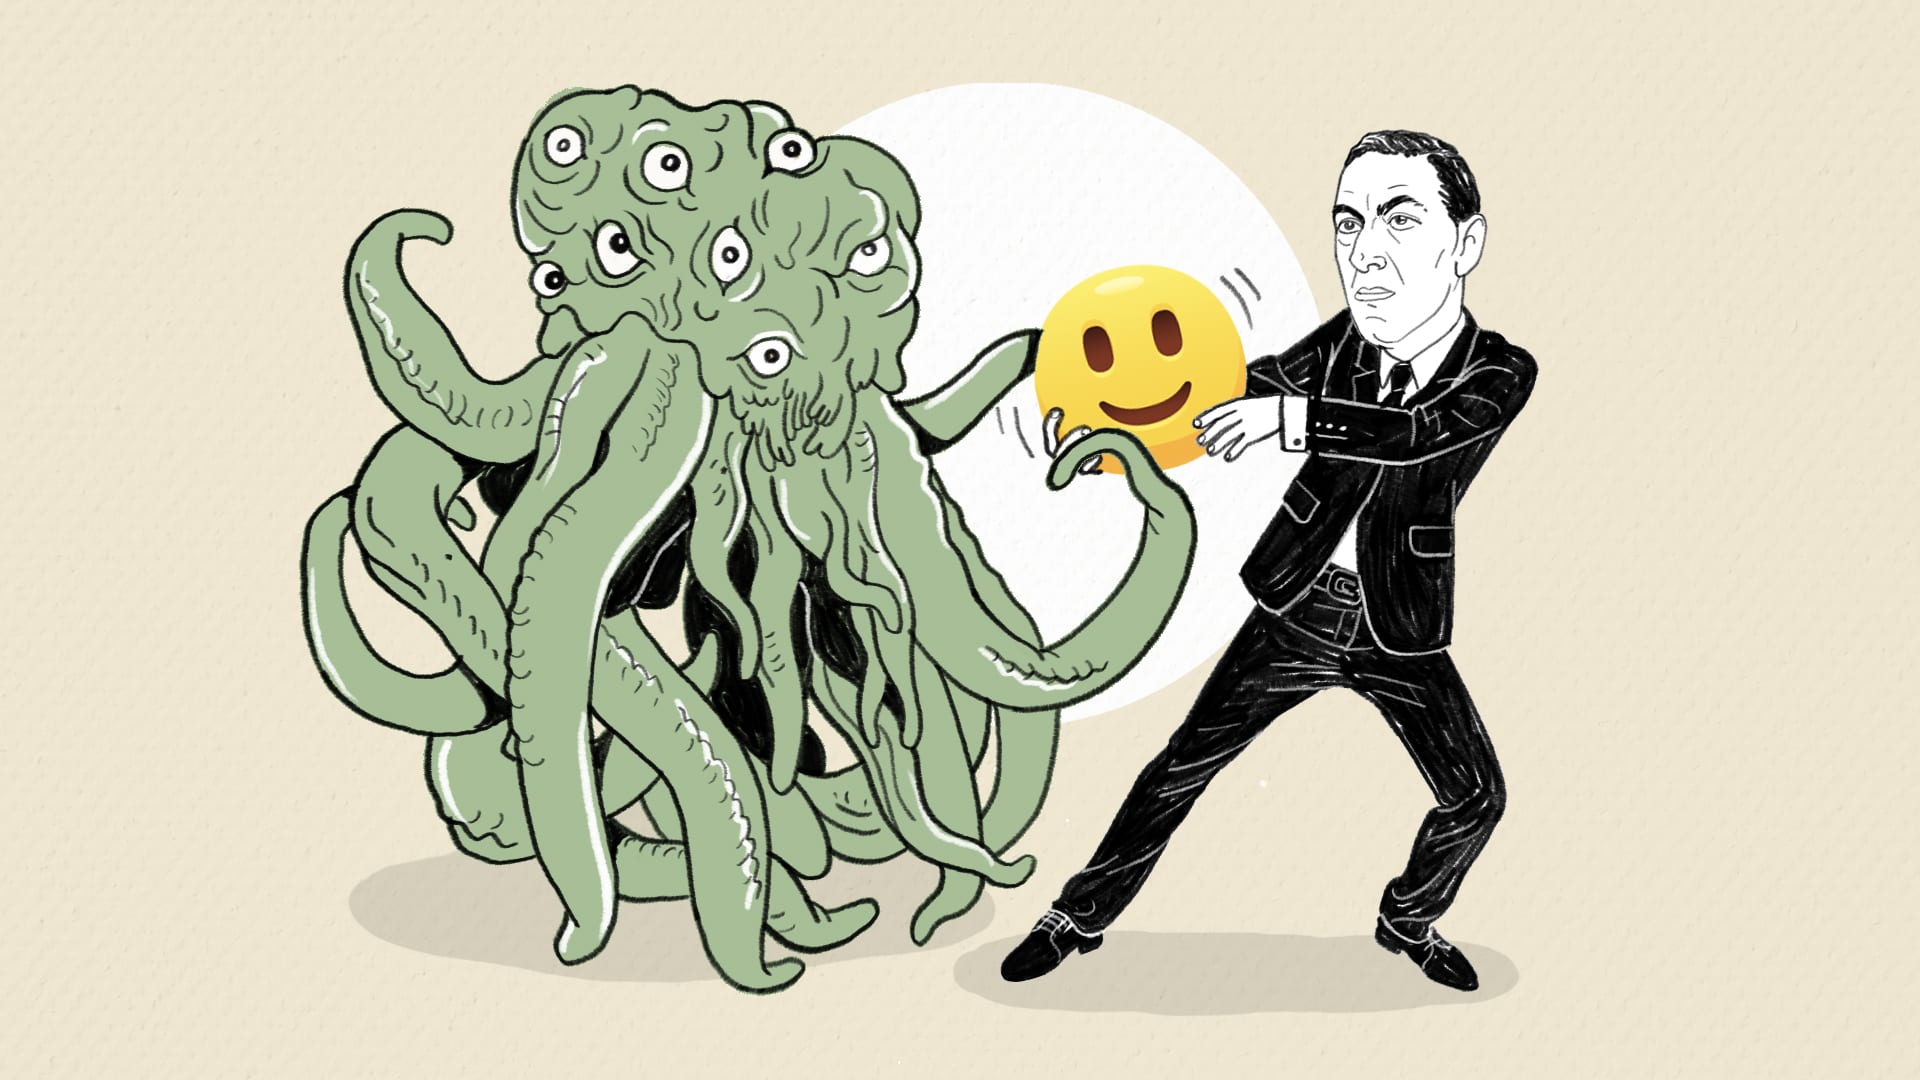 The world's top H.P. Lovecraft expert weighs in on a monstrous viral meme in the A.I. world